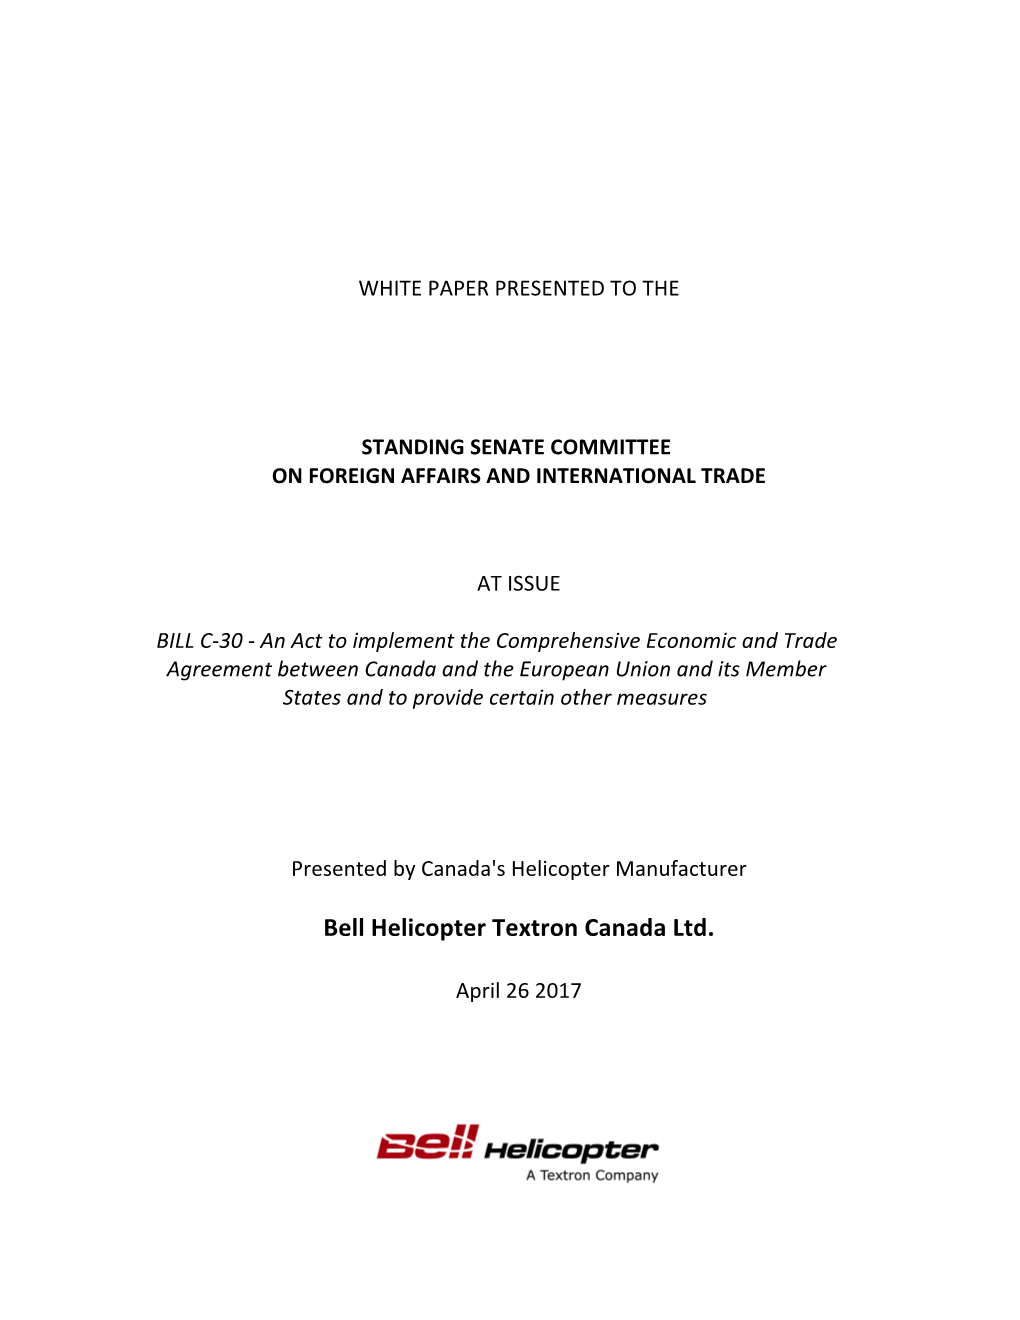 Bell Helicopter Textron Canada Ltd